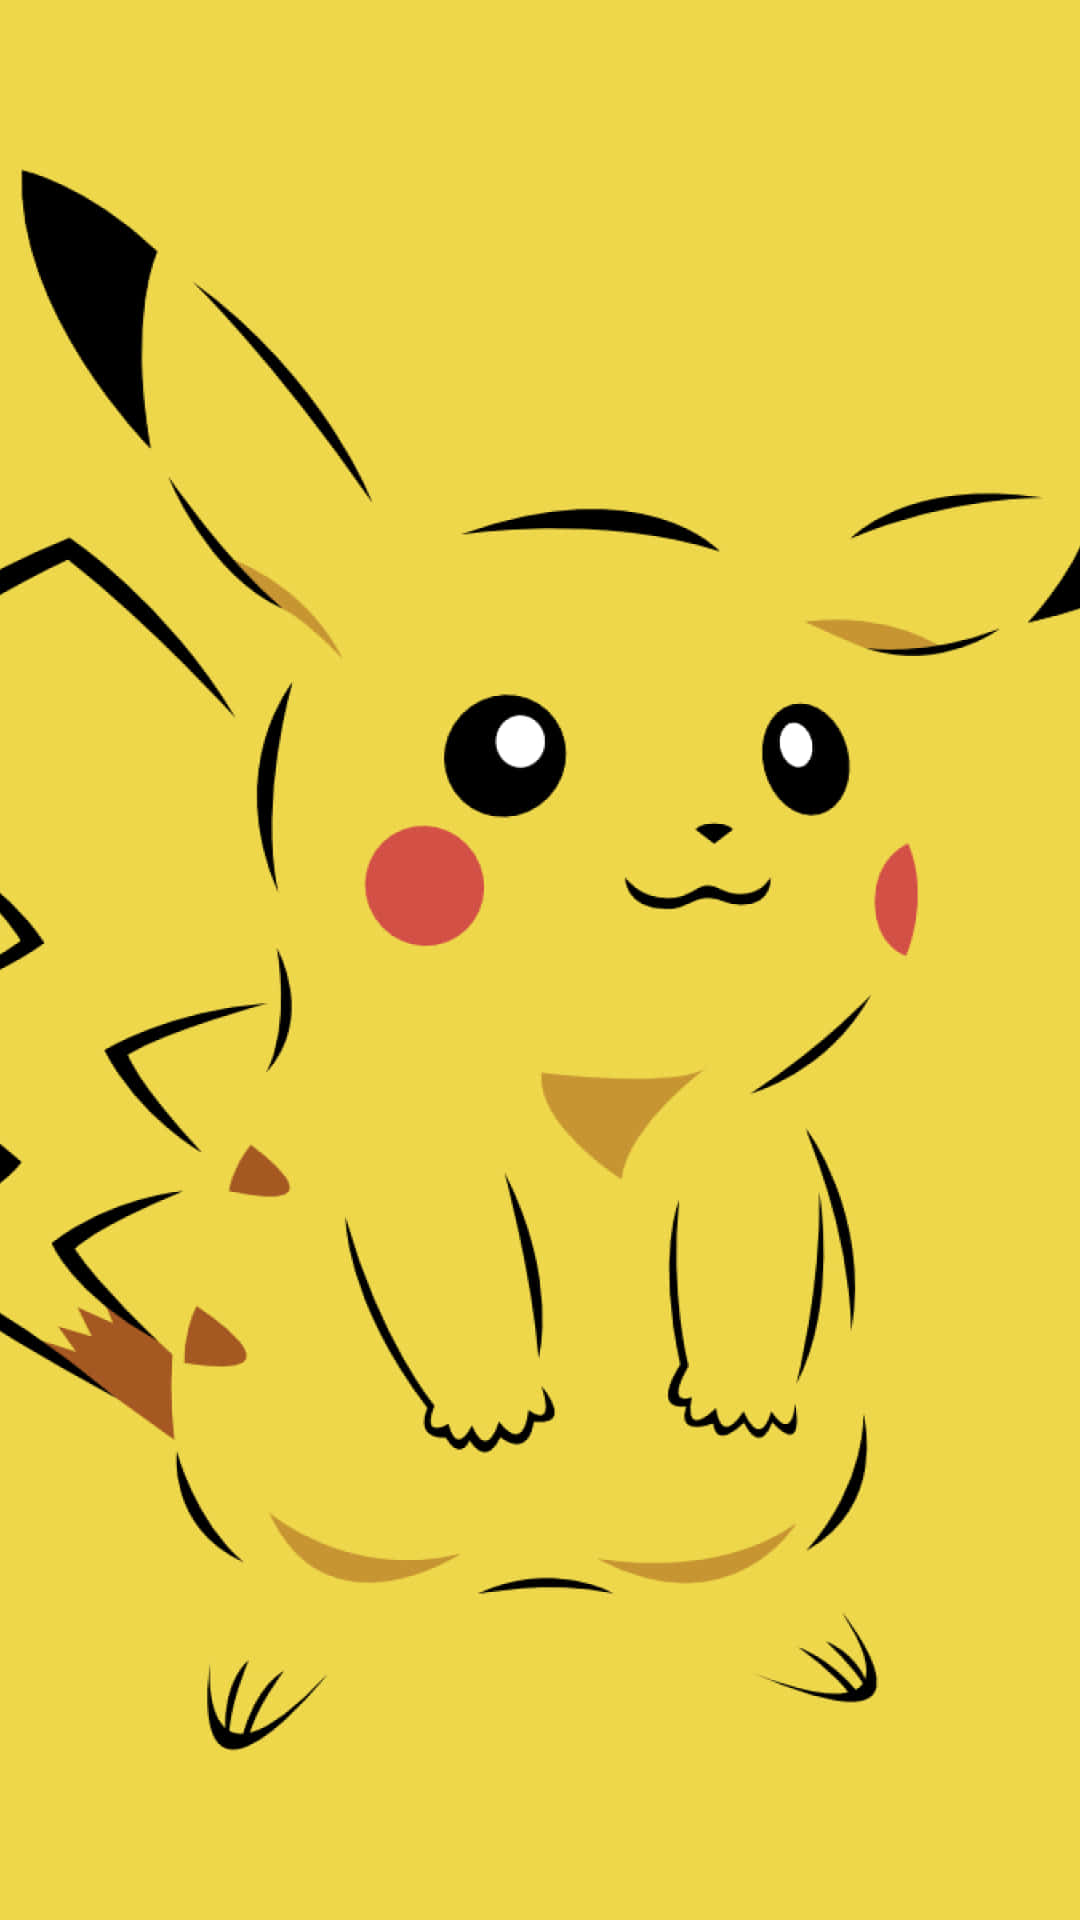 Pikachu Is Sitting On A Yellow Background